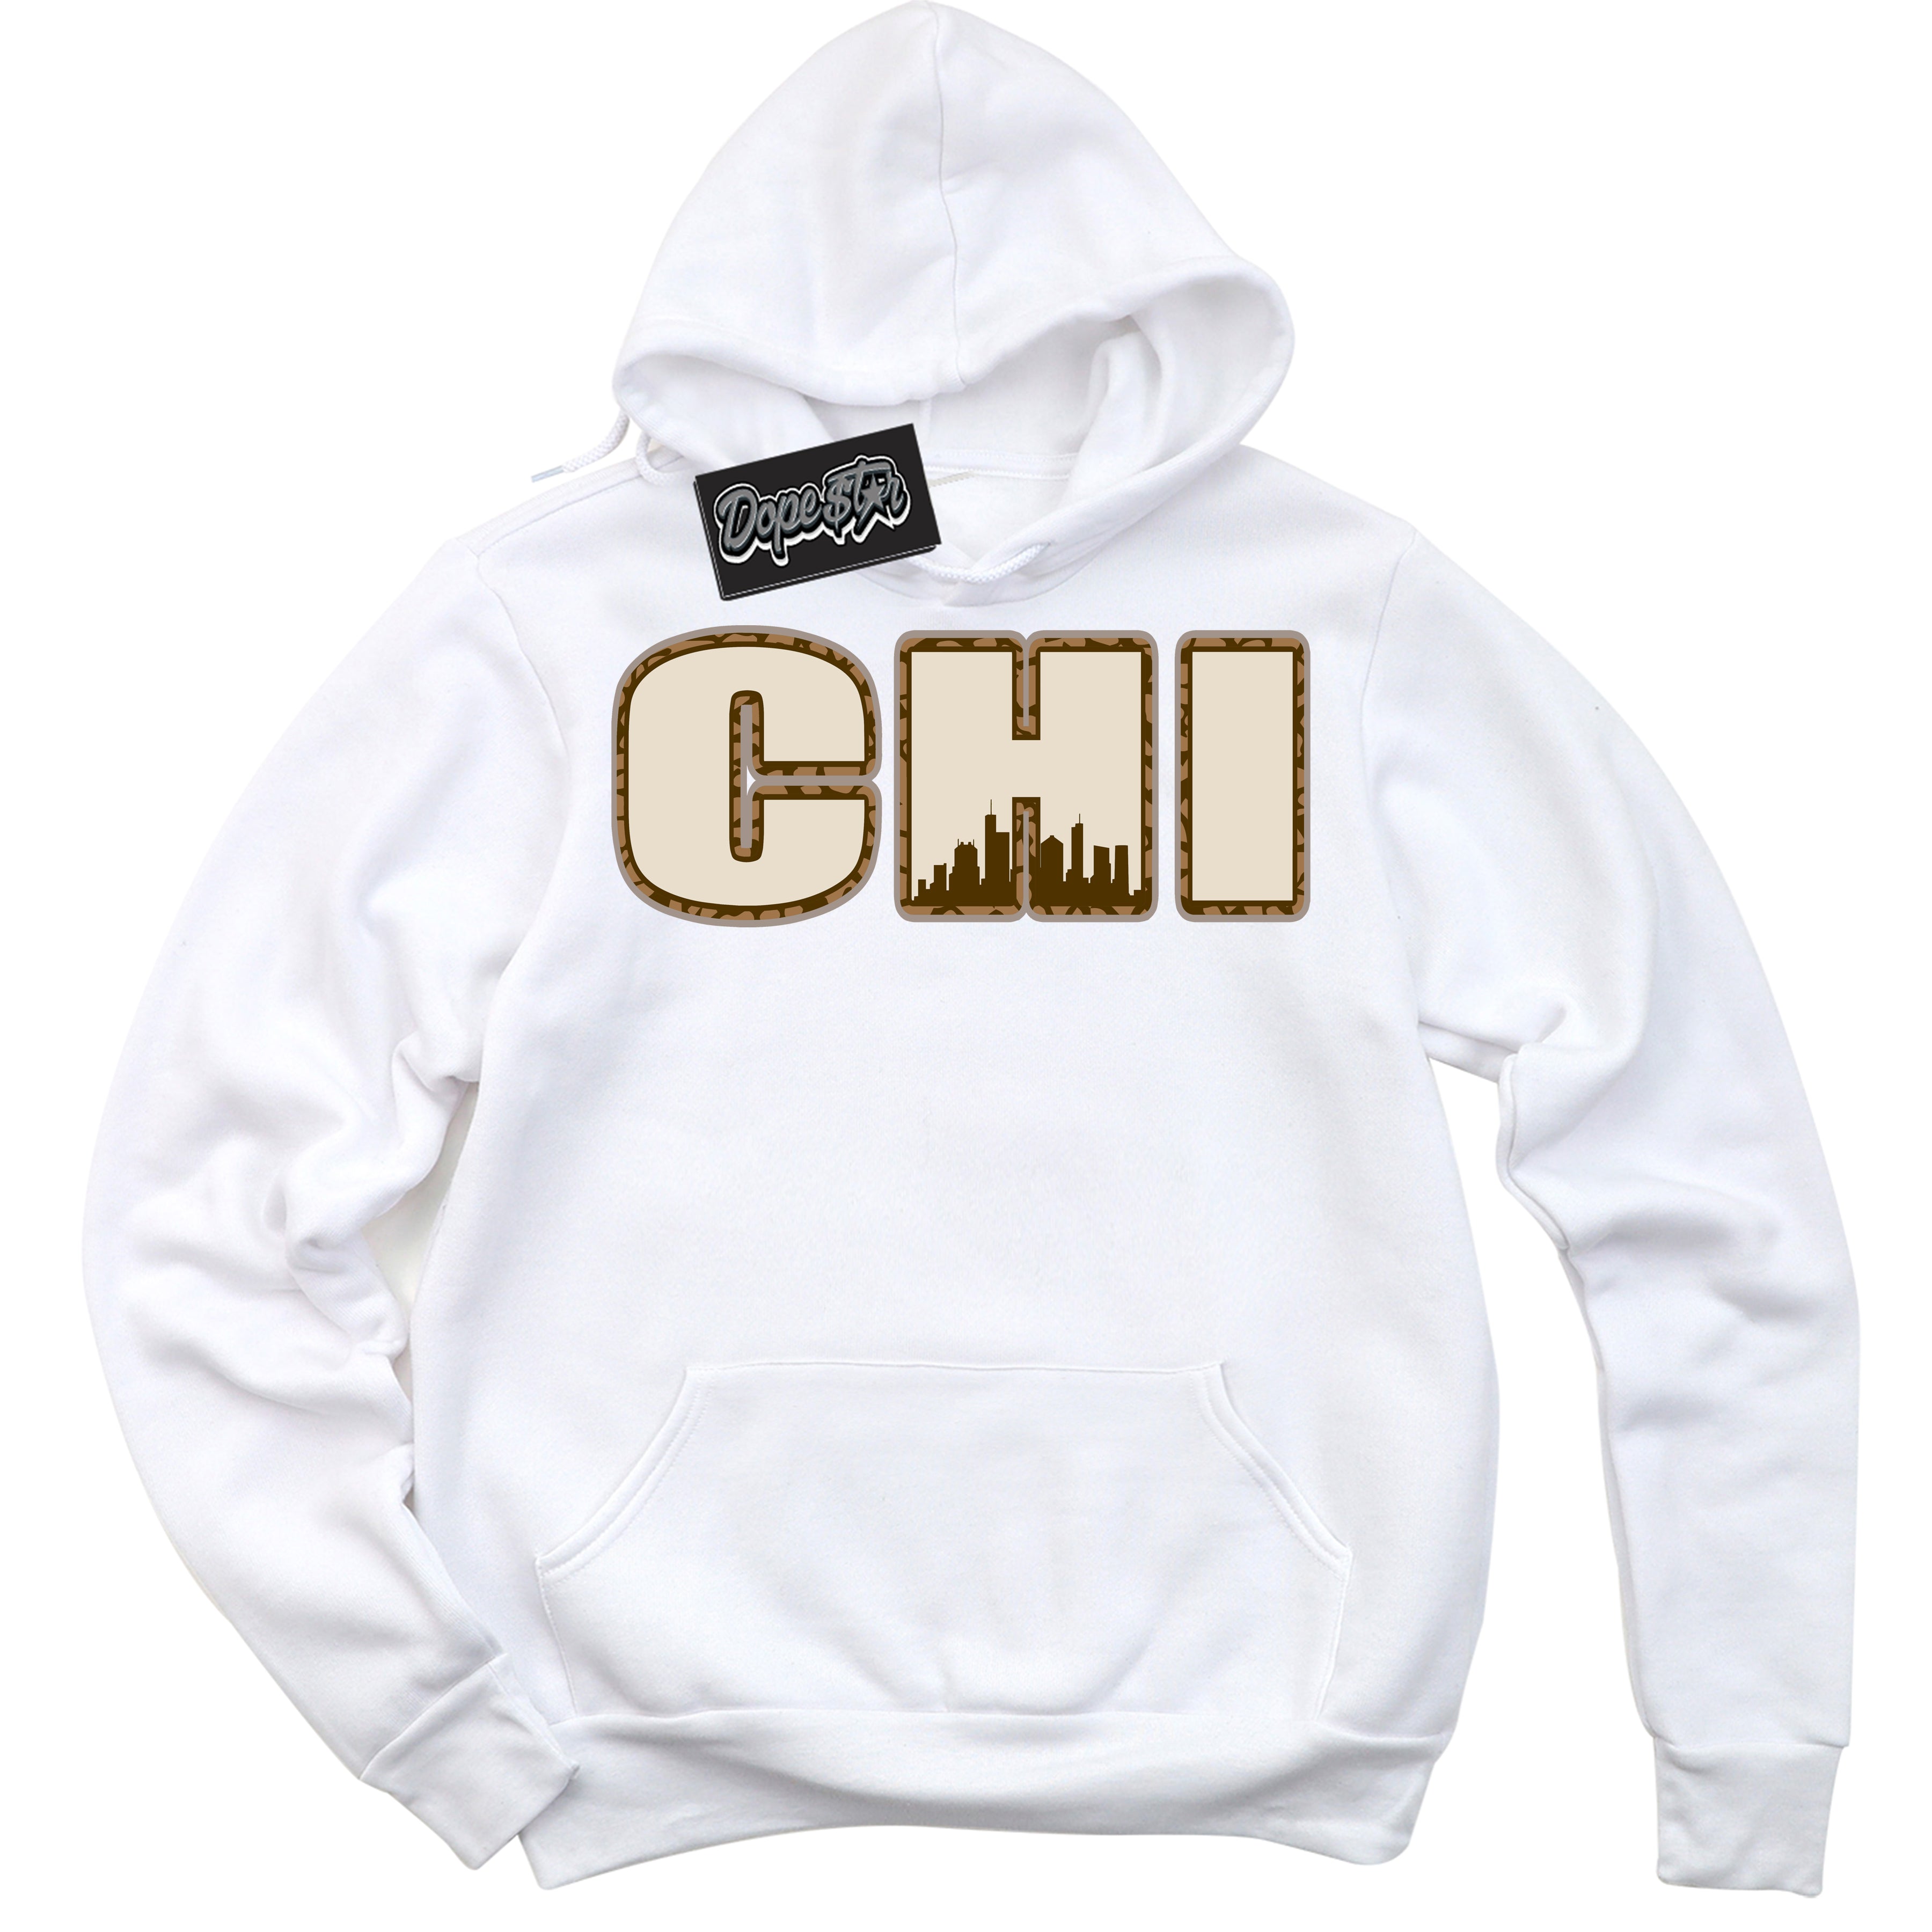 Cool White Graphic DopeStar Hoodie with “ Chicago “ print, that perfectly matches Palomino 3s sneakers